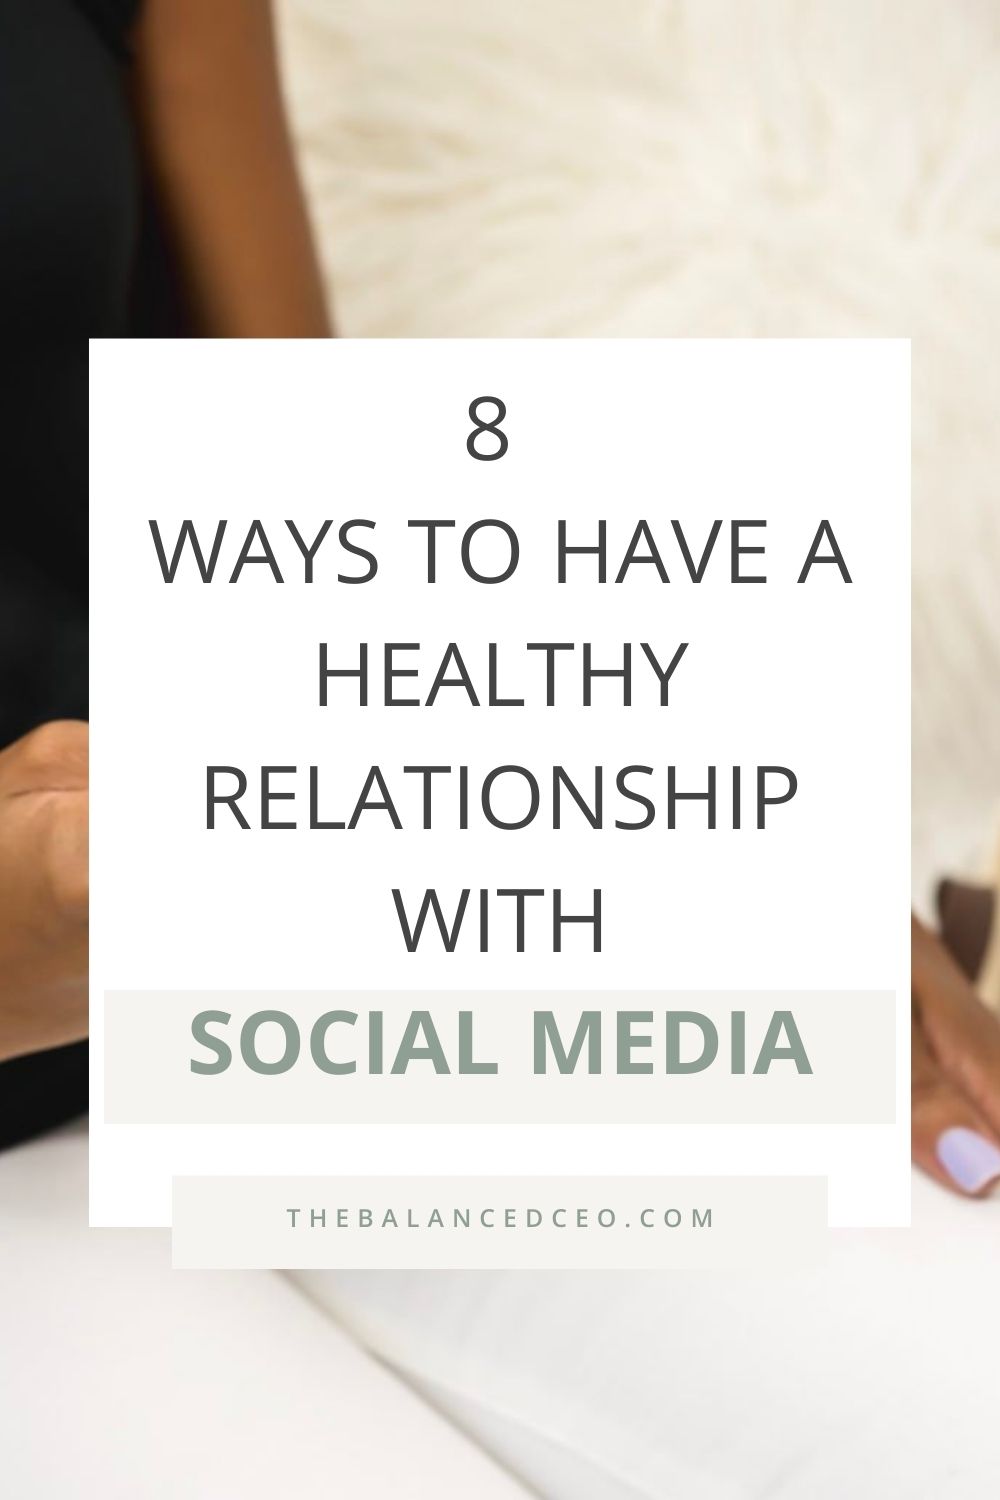 8 Ways to Have a Healthy Relationship with Social Media